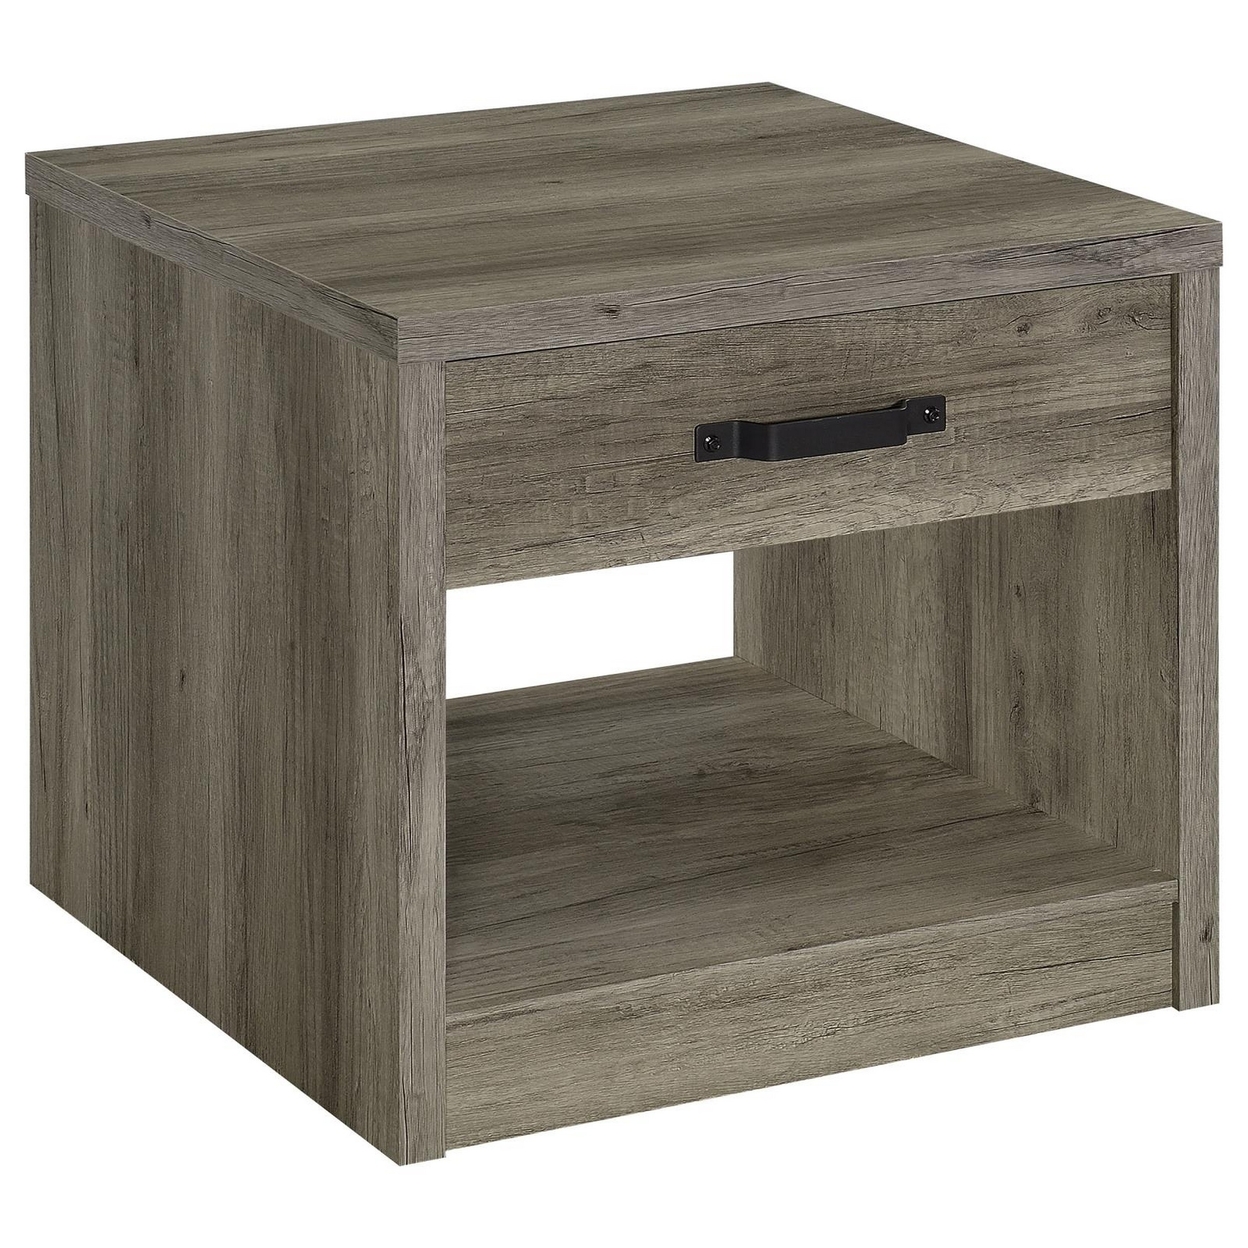 Lix 24 Inch Square End Table With 1 Drawer, Rustic Weathered Gray Finish -Saltoro Sherpi